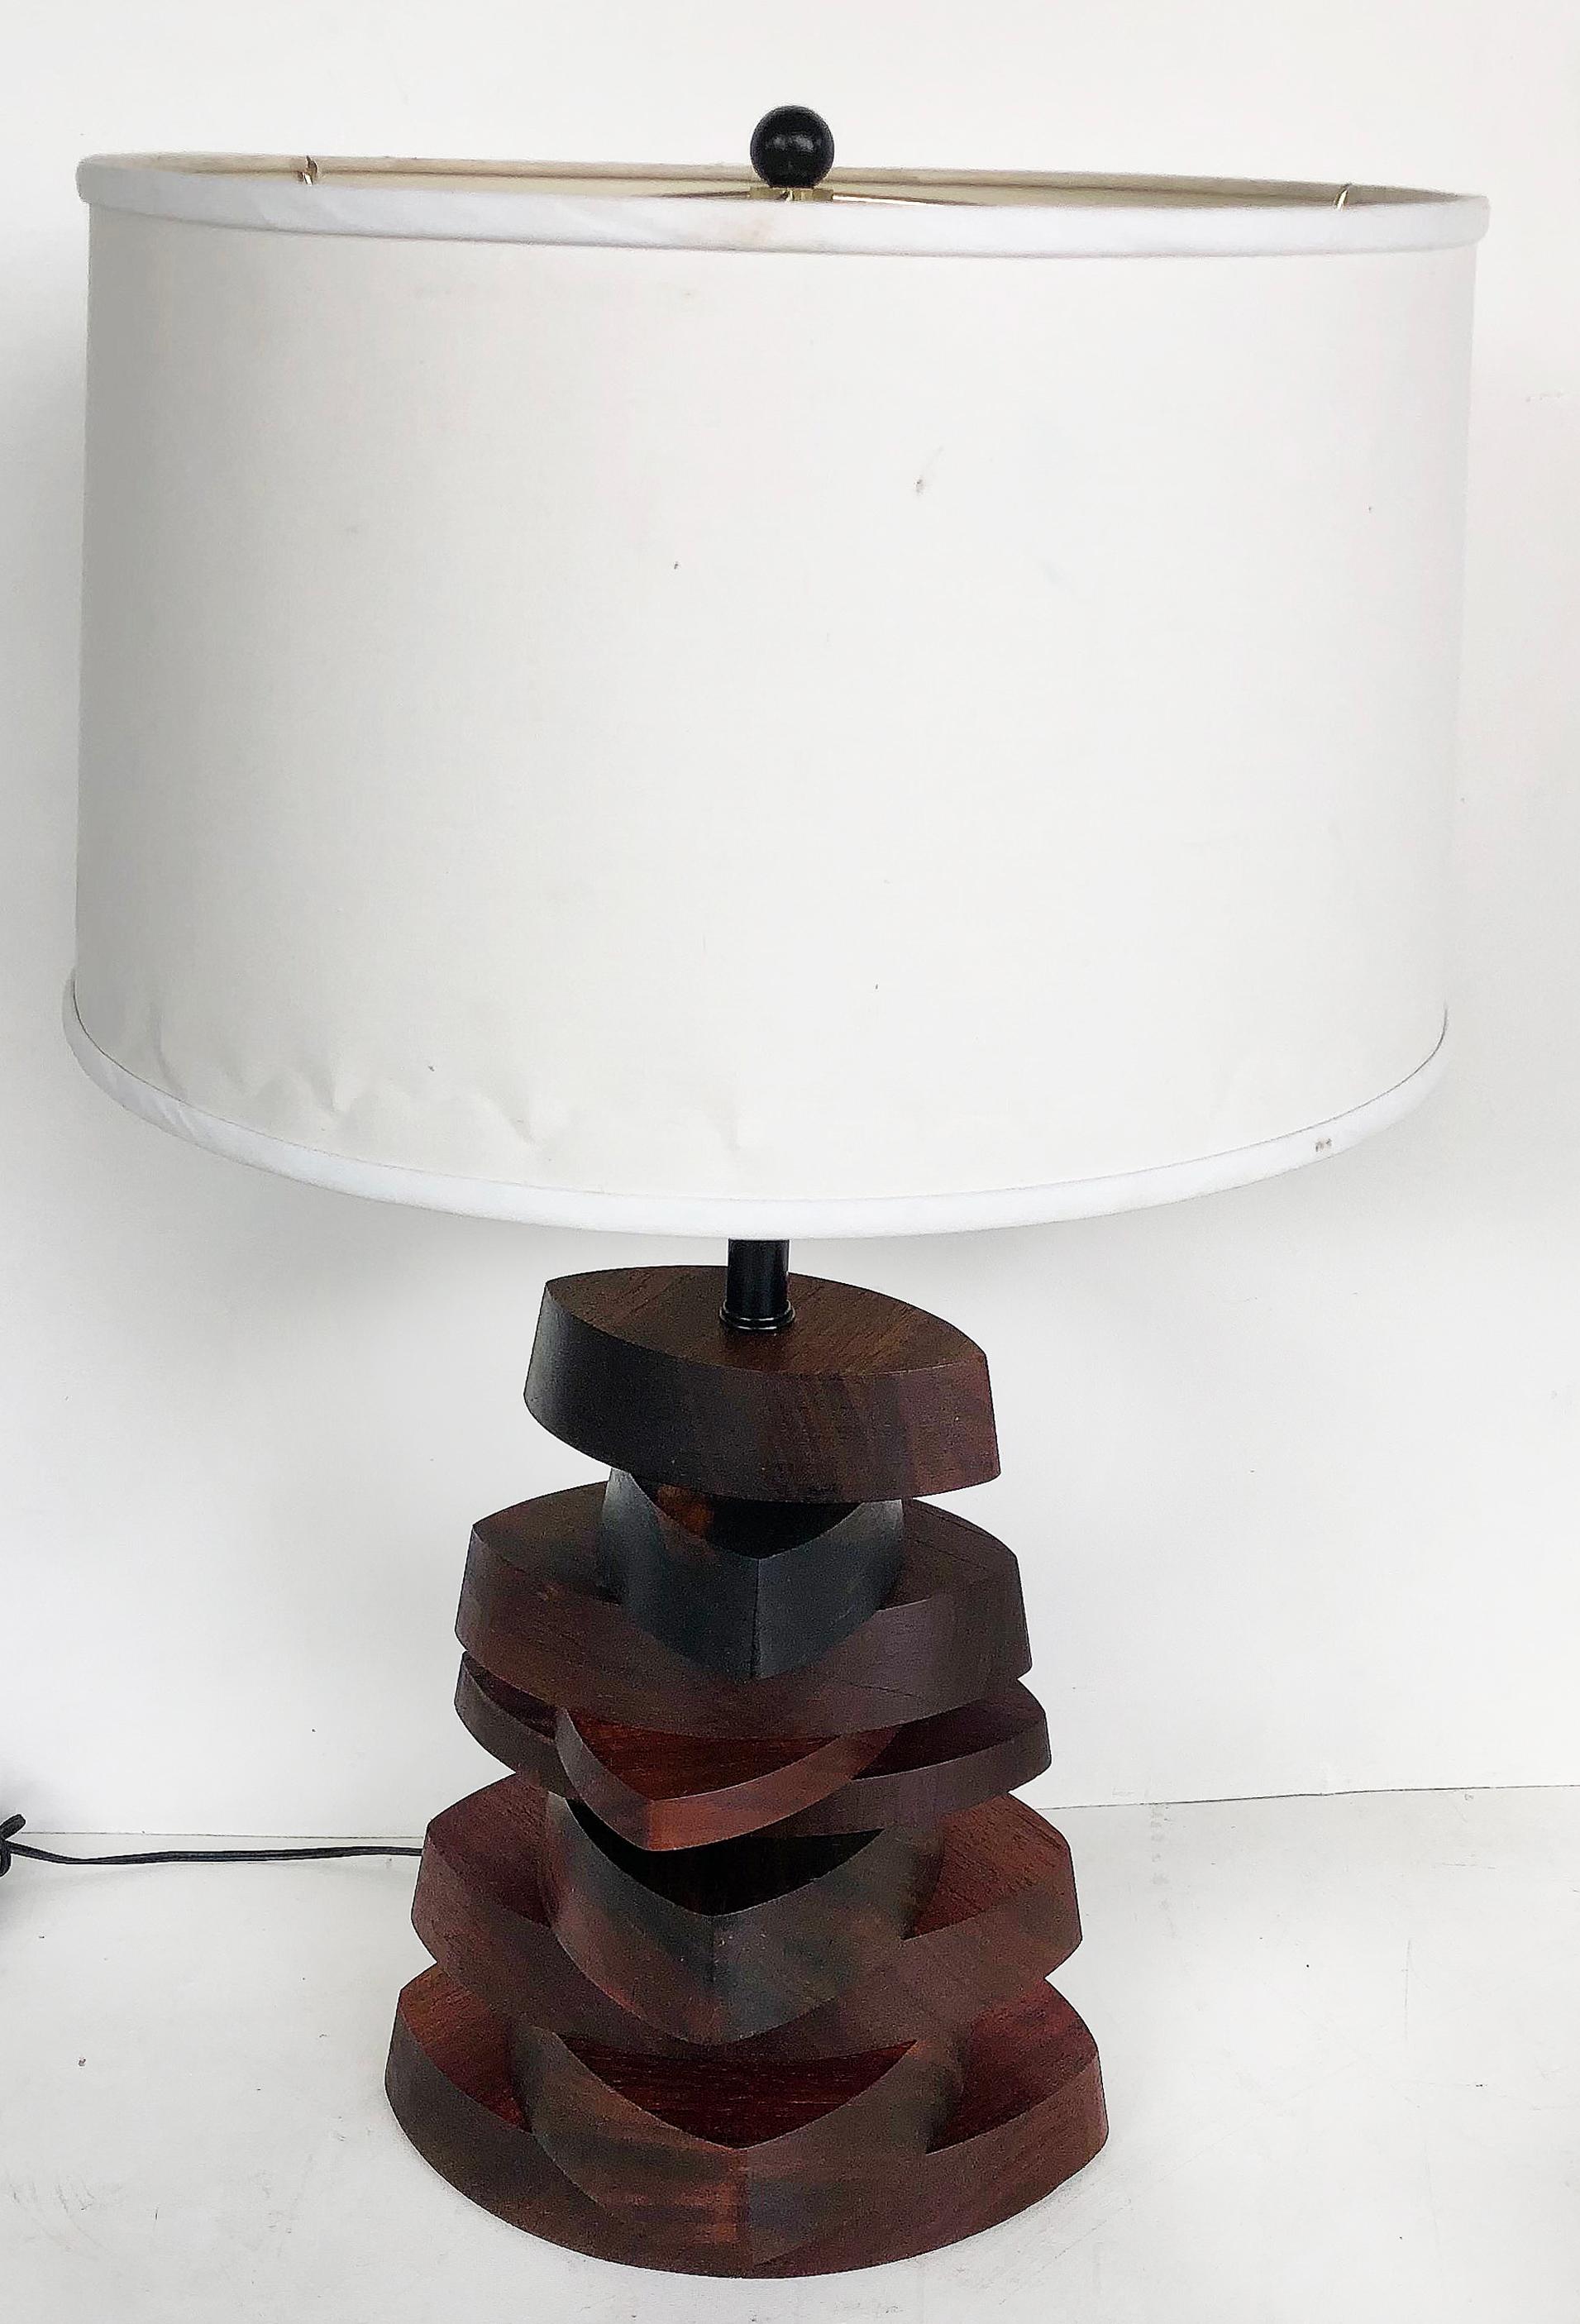 American Studio Mechanical Wood Specimen Table Lamp, Mid-Late 20th Century For Sale 4